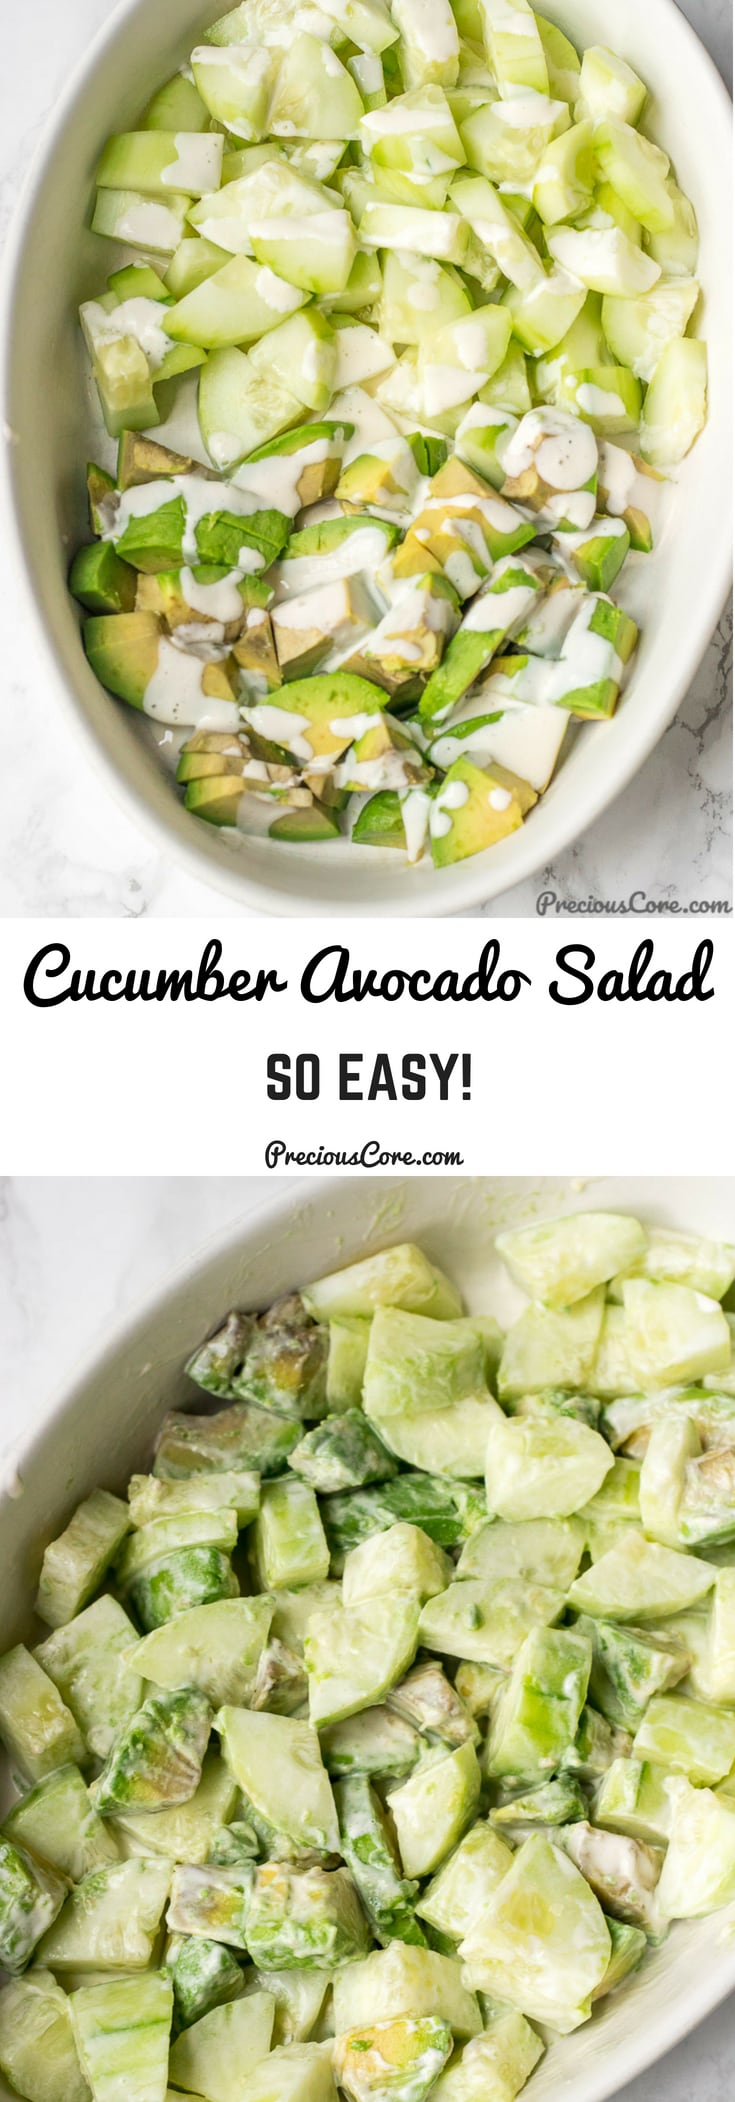 This Cucumber Avocado Salad is fresh, crunchy, creamy, slightly tangy, slightly sweet and the best part is it is so easy to make! This Cucumber Mango Salad is great for potlucks, picnics or as a barbecue side dish. Get the full recipe on Precious Core. #salads #summerrecipes #grilling